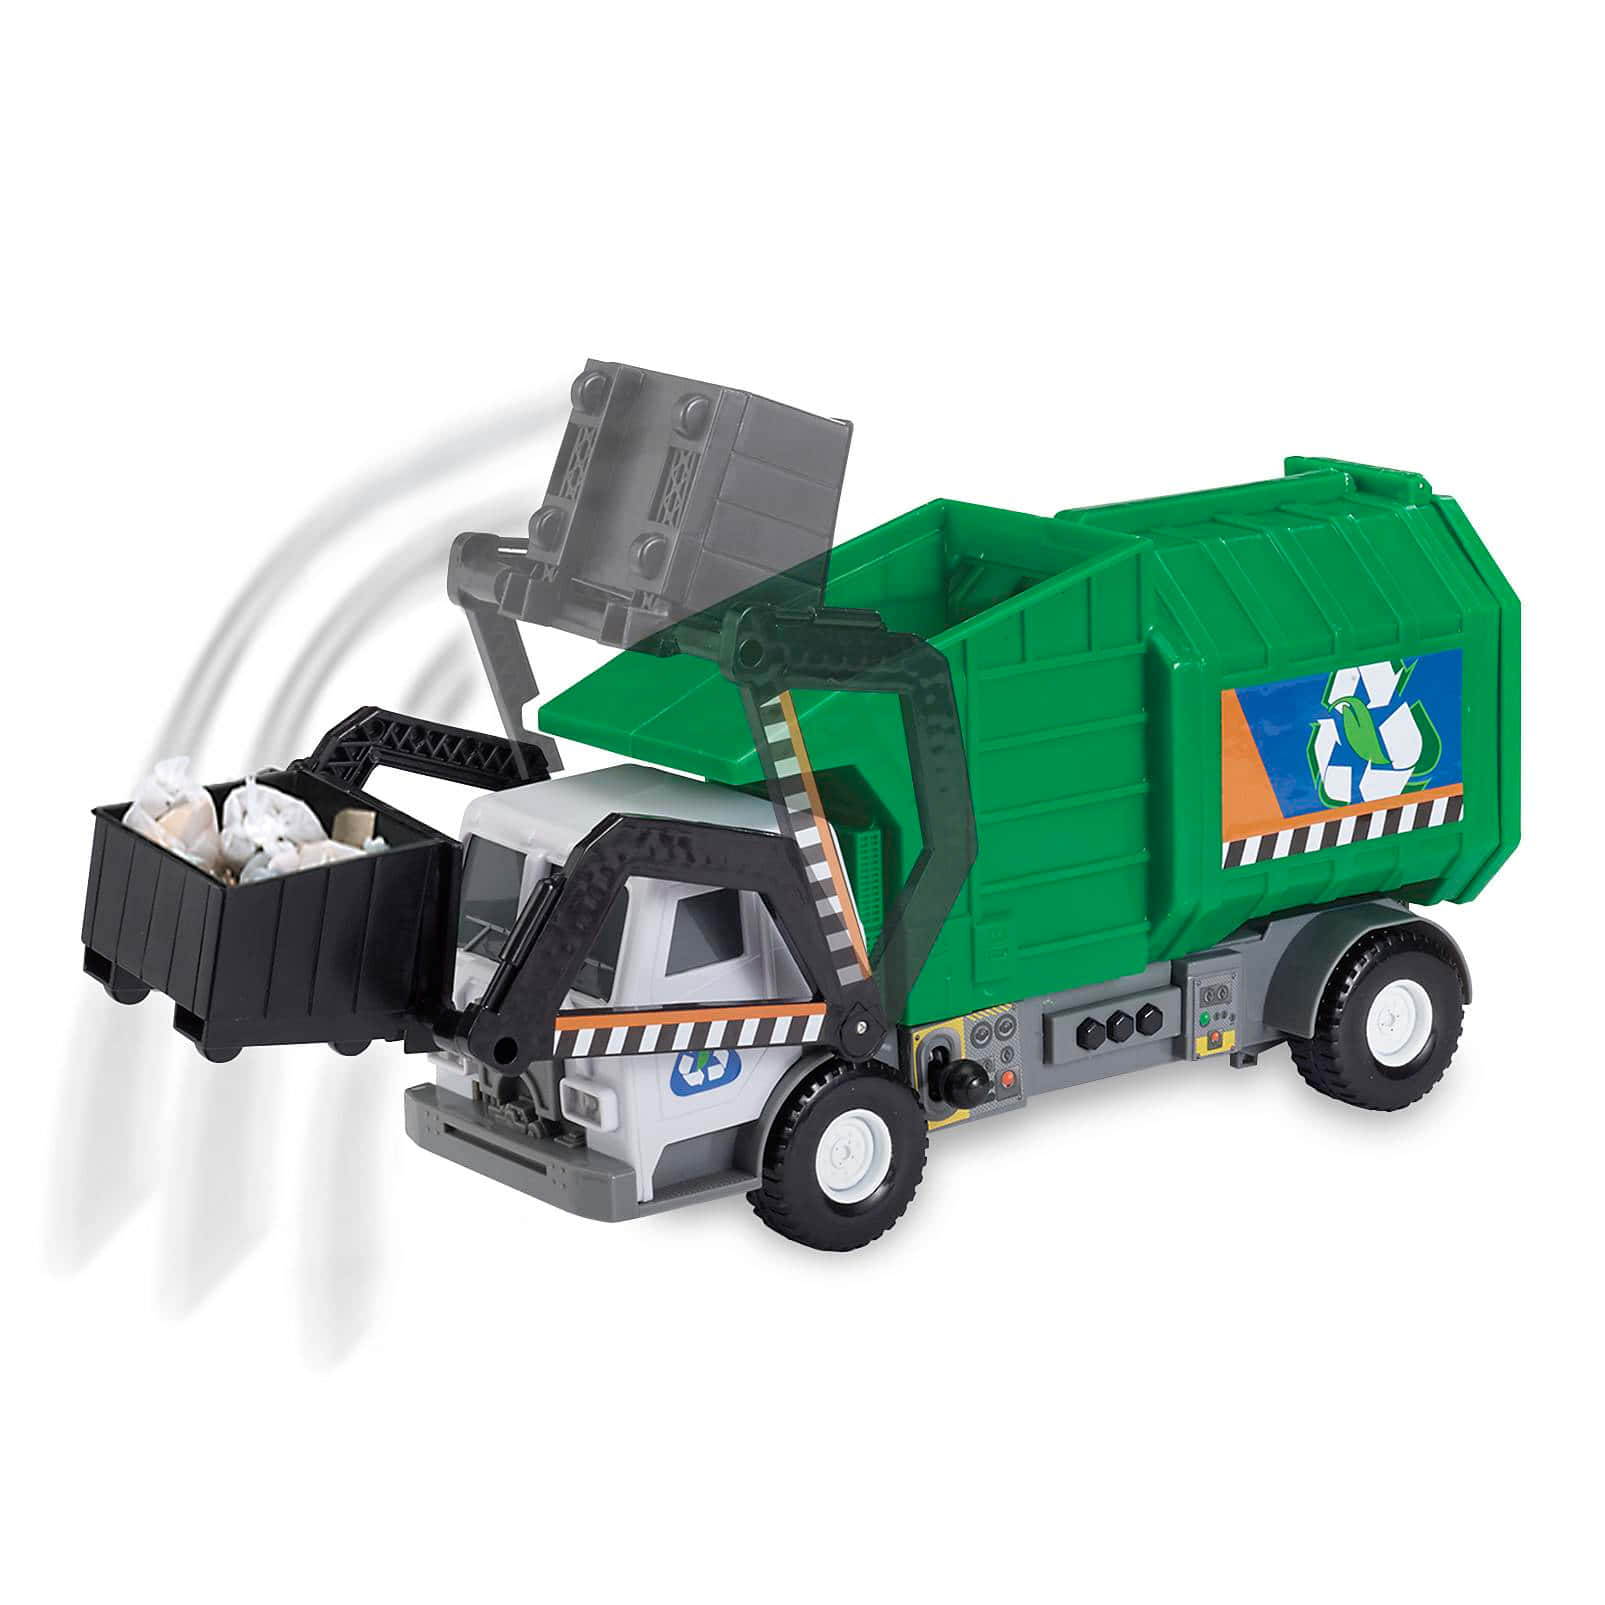 A Toy Garbage Truck With A Garbage Bag